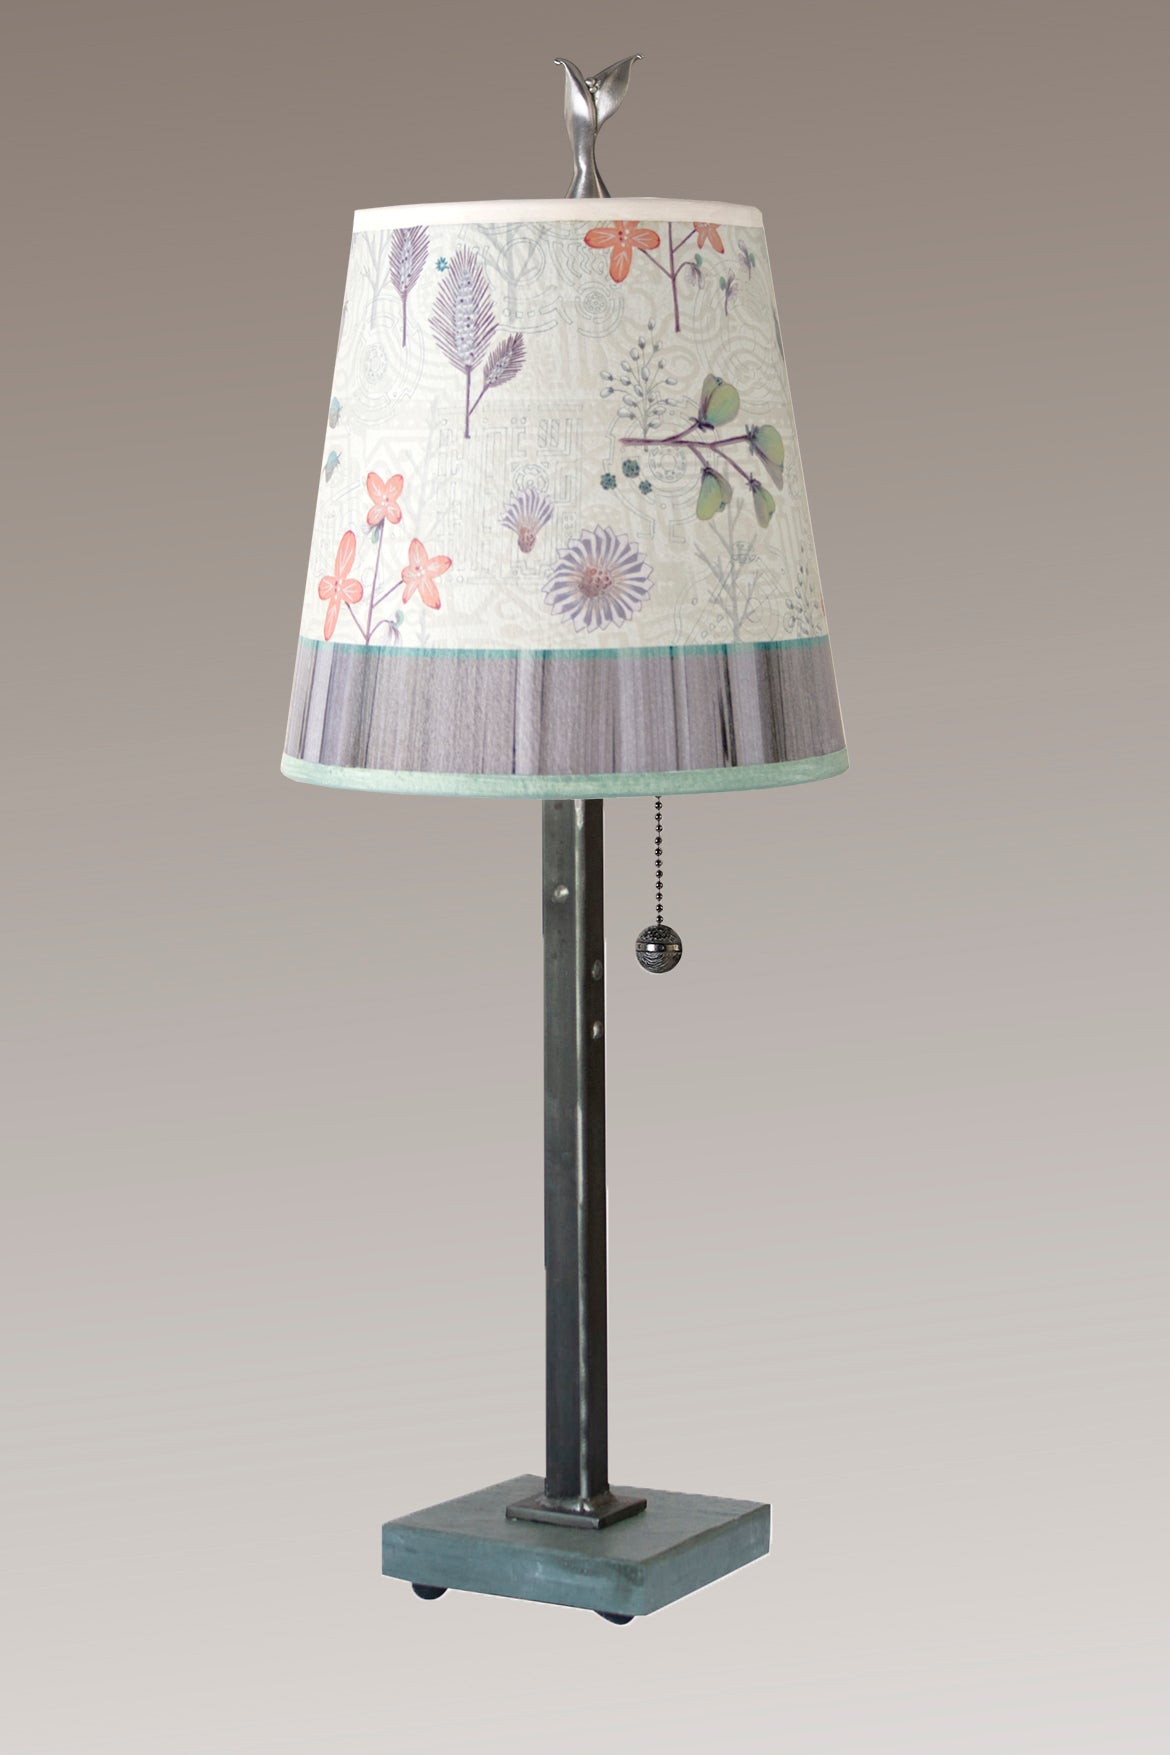 Janna Ugone & Co Table Lamps Steel Table Lamp with Small Drum Shade in Flora & Maze